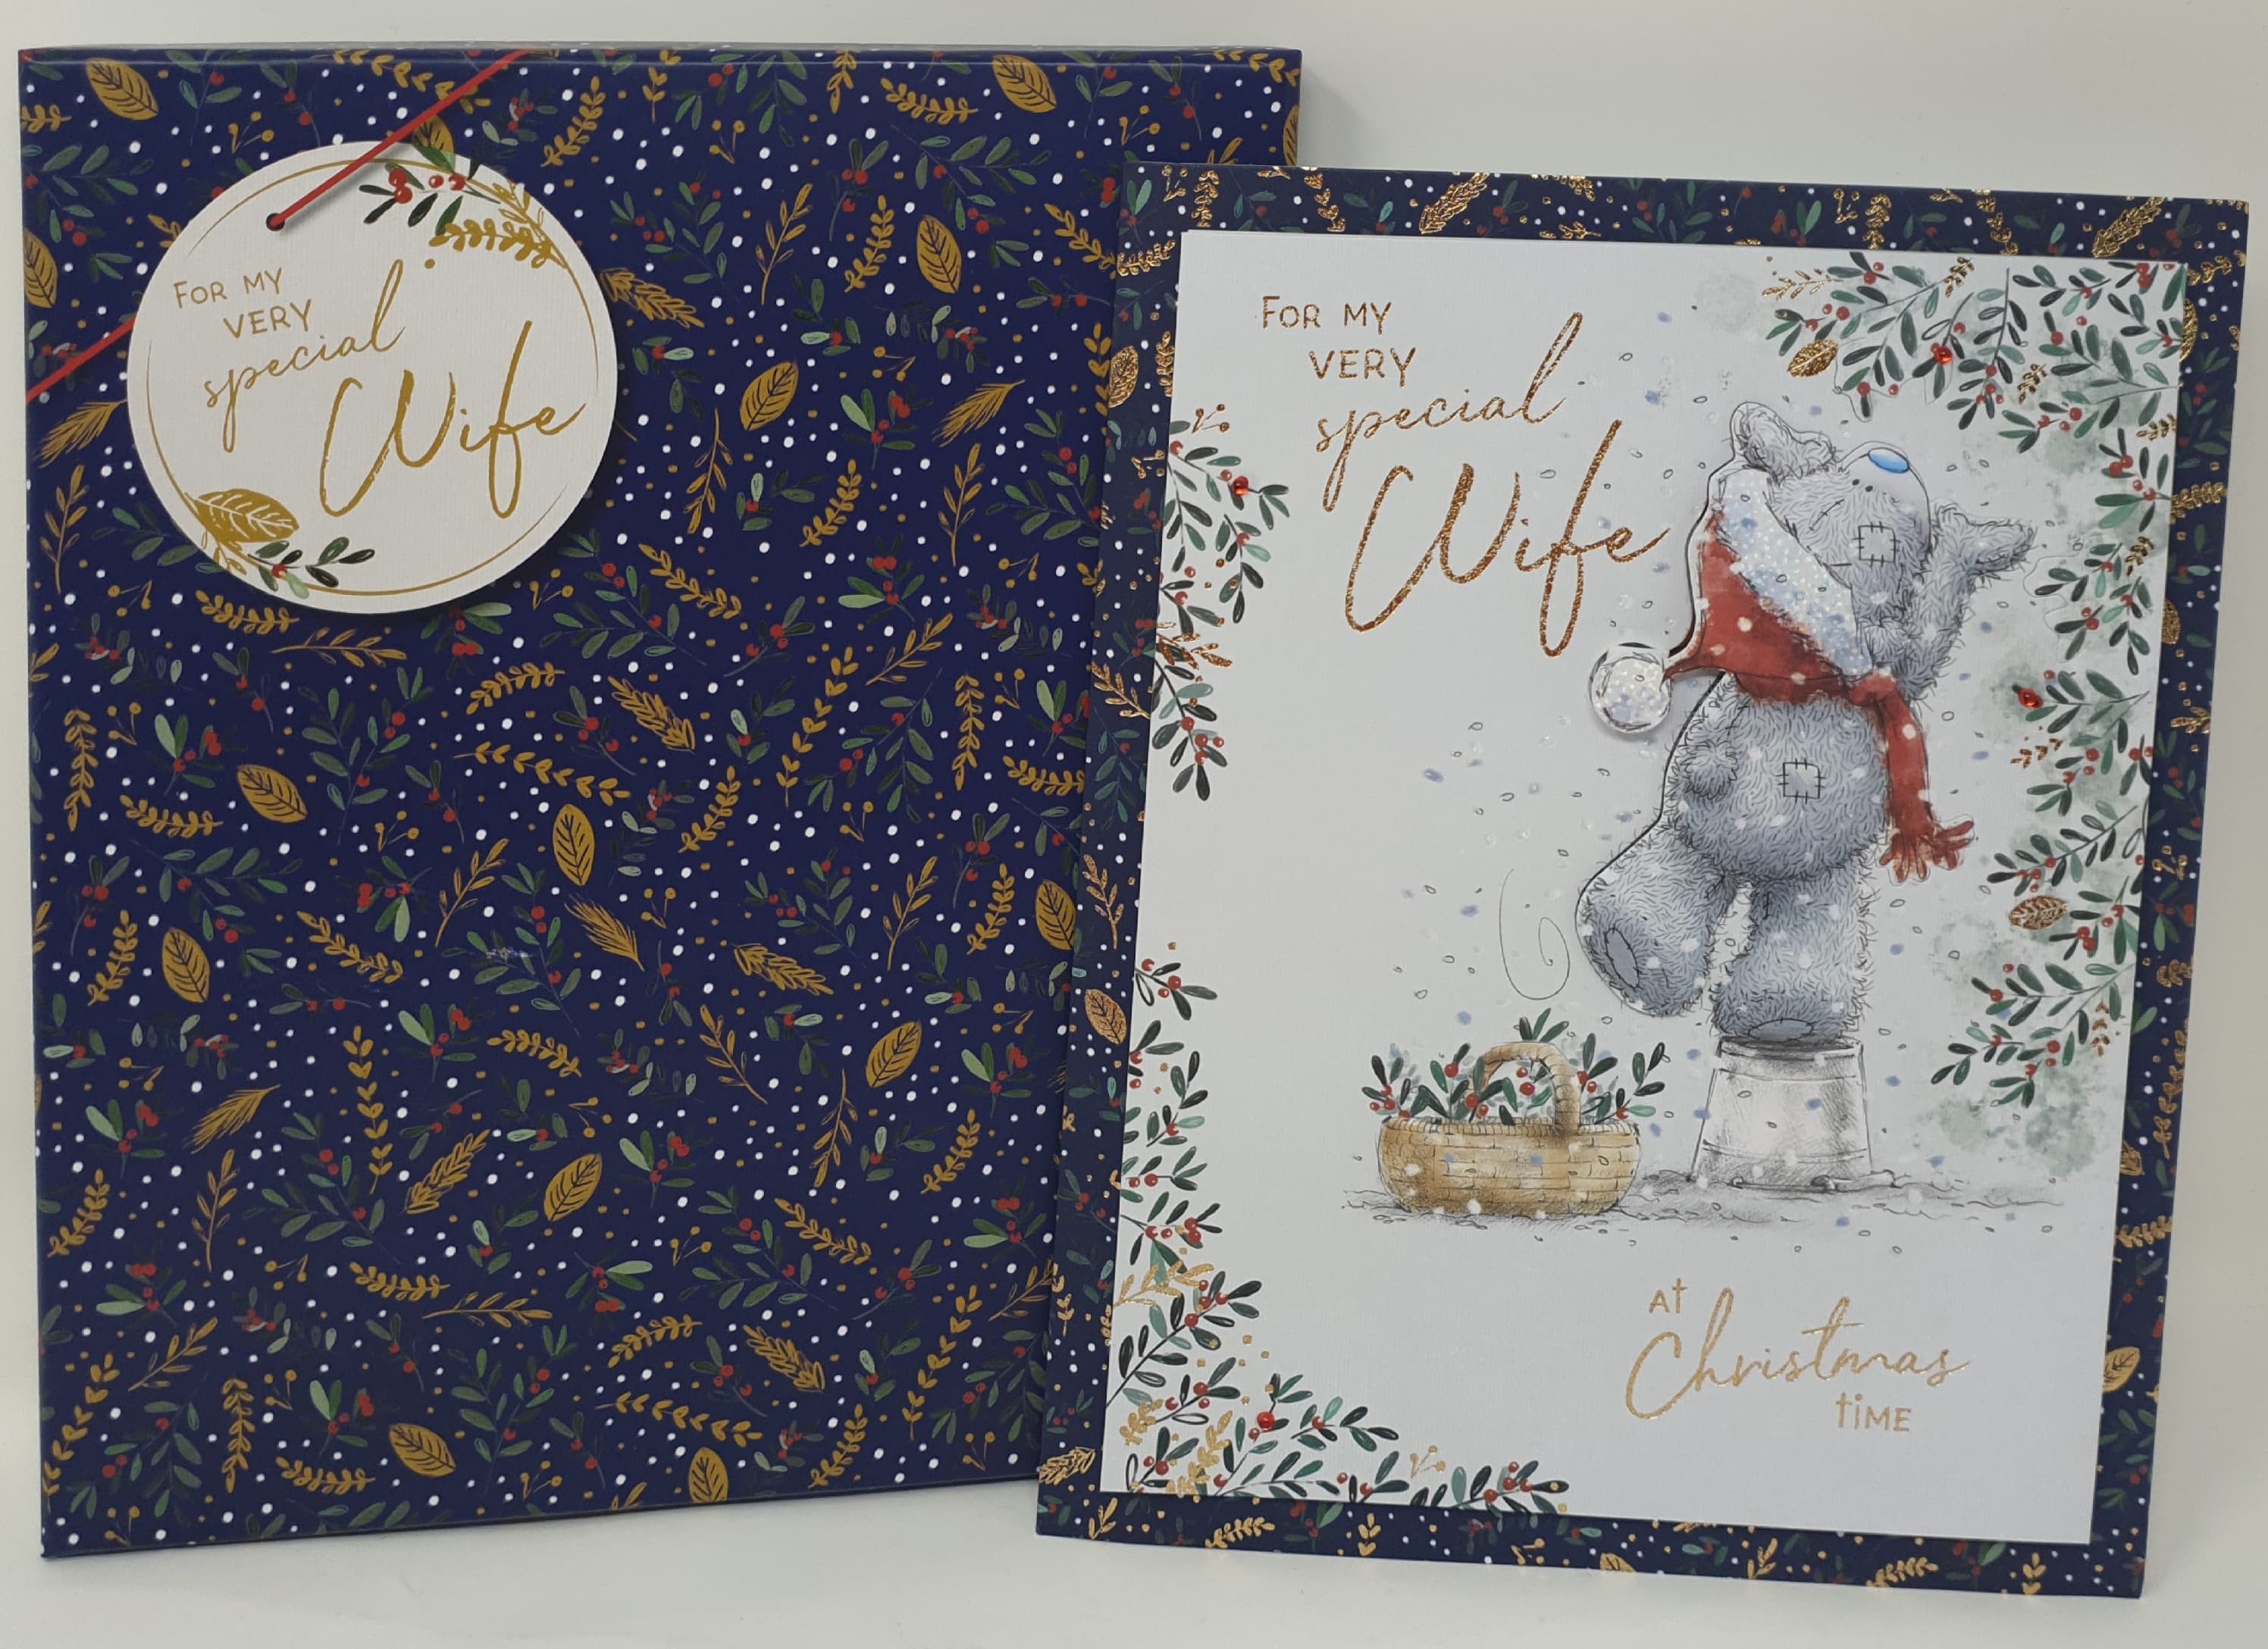 Wife Christmas Card - Very Special Wife / Cute Teddy Bear Reaching for Berries (Card In A Presentation Box)